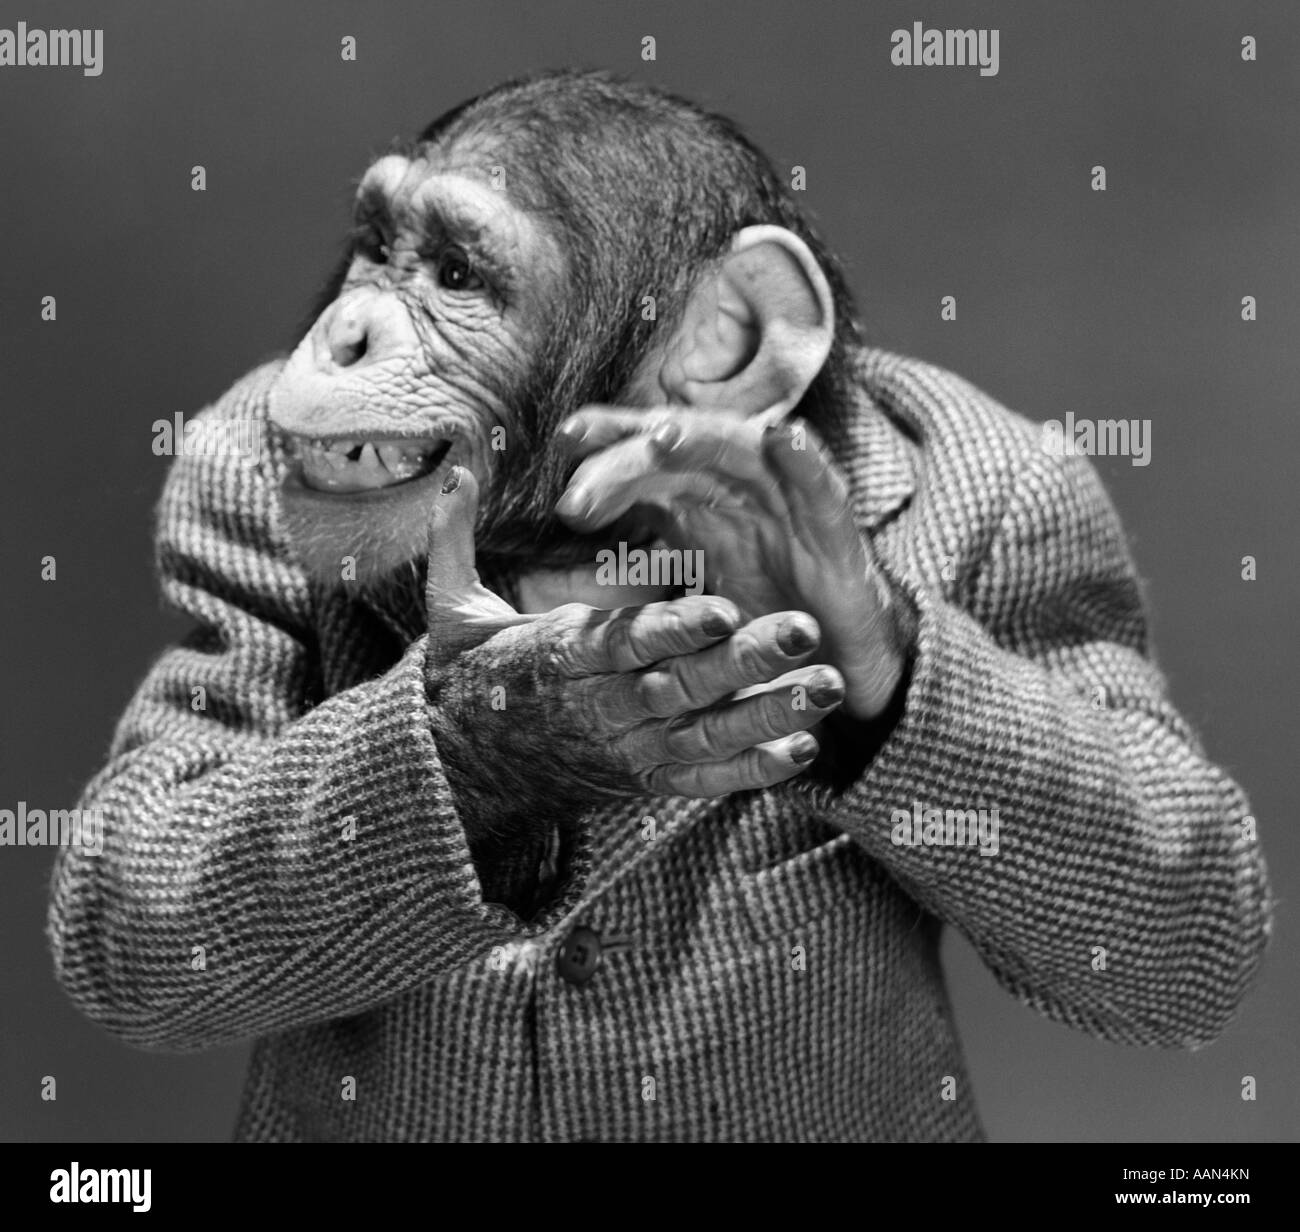 1950s 1960s MONKEY CHIMP CHIMPANZEE DRESSED IN BUSINESS SPORT JACKET  CLAPPING HANDS Stock Photo - Alamy